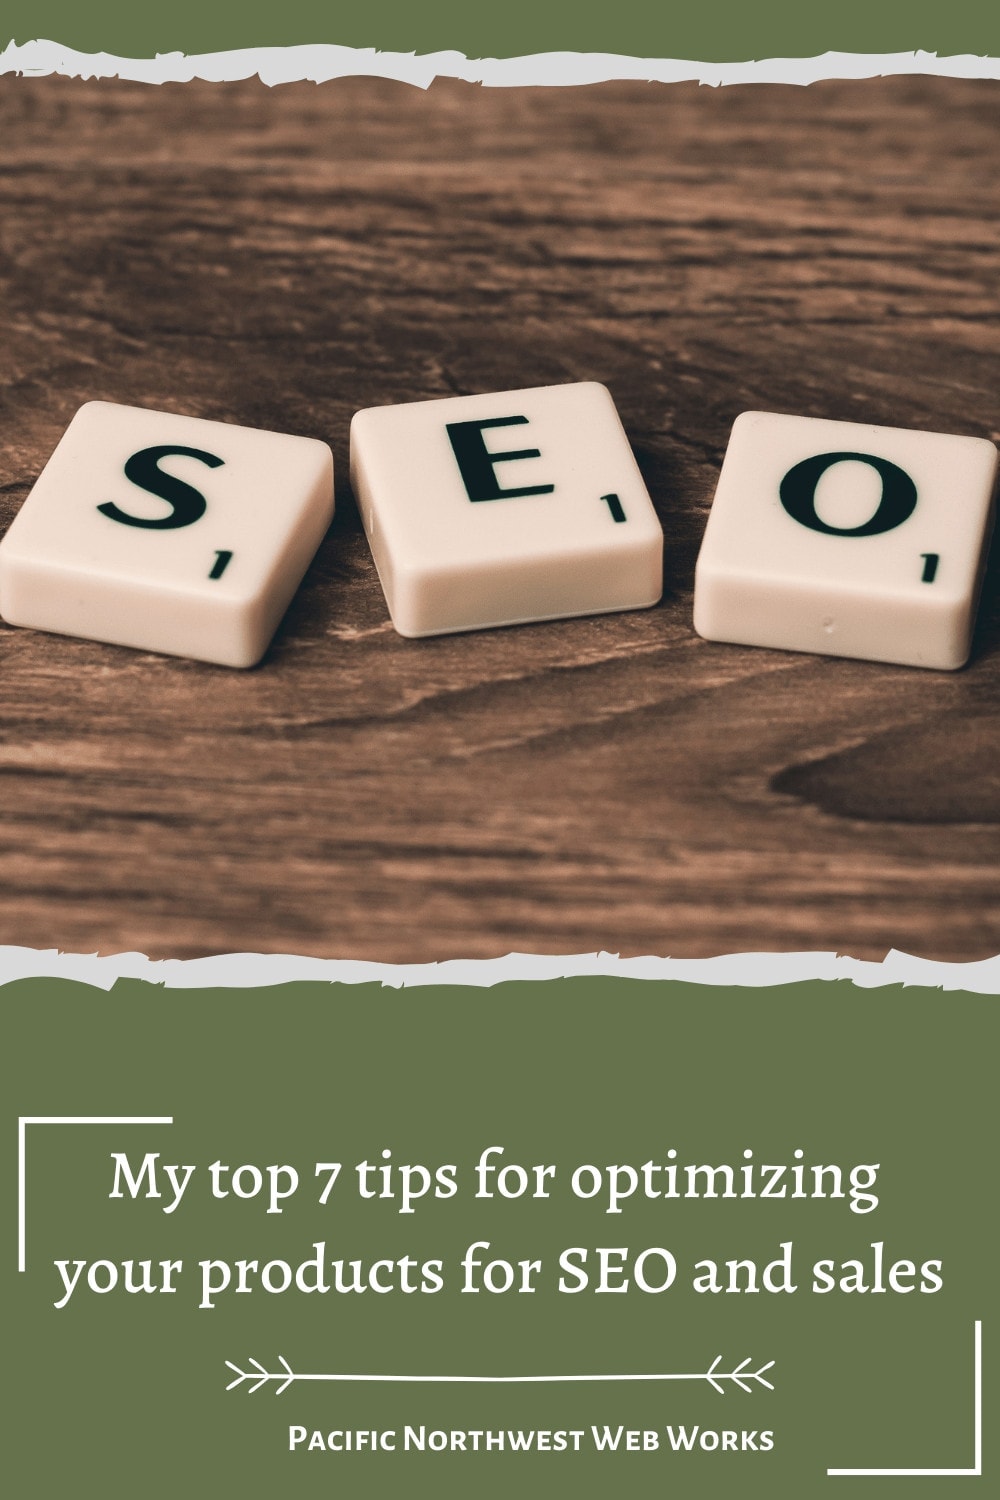 My top 7 tips for optimizing your products for SEO and sales